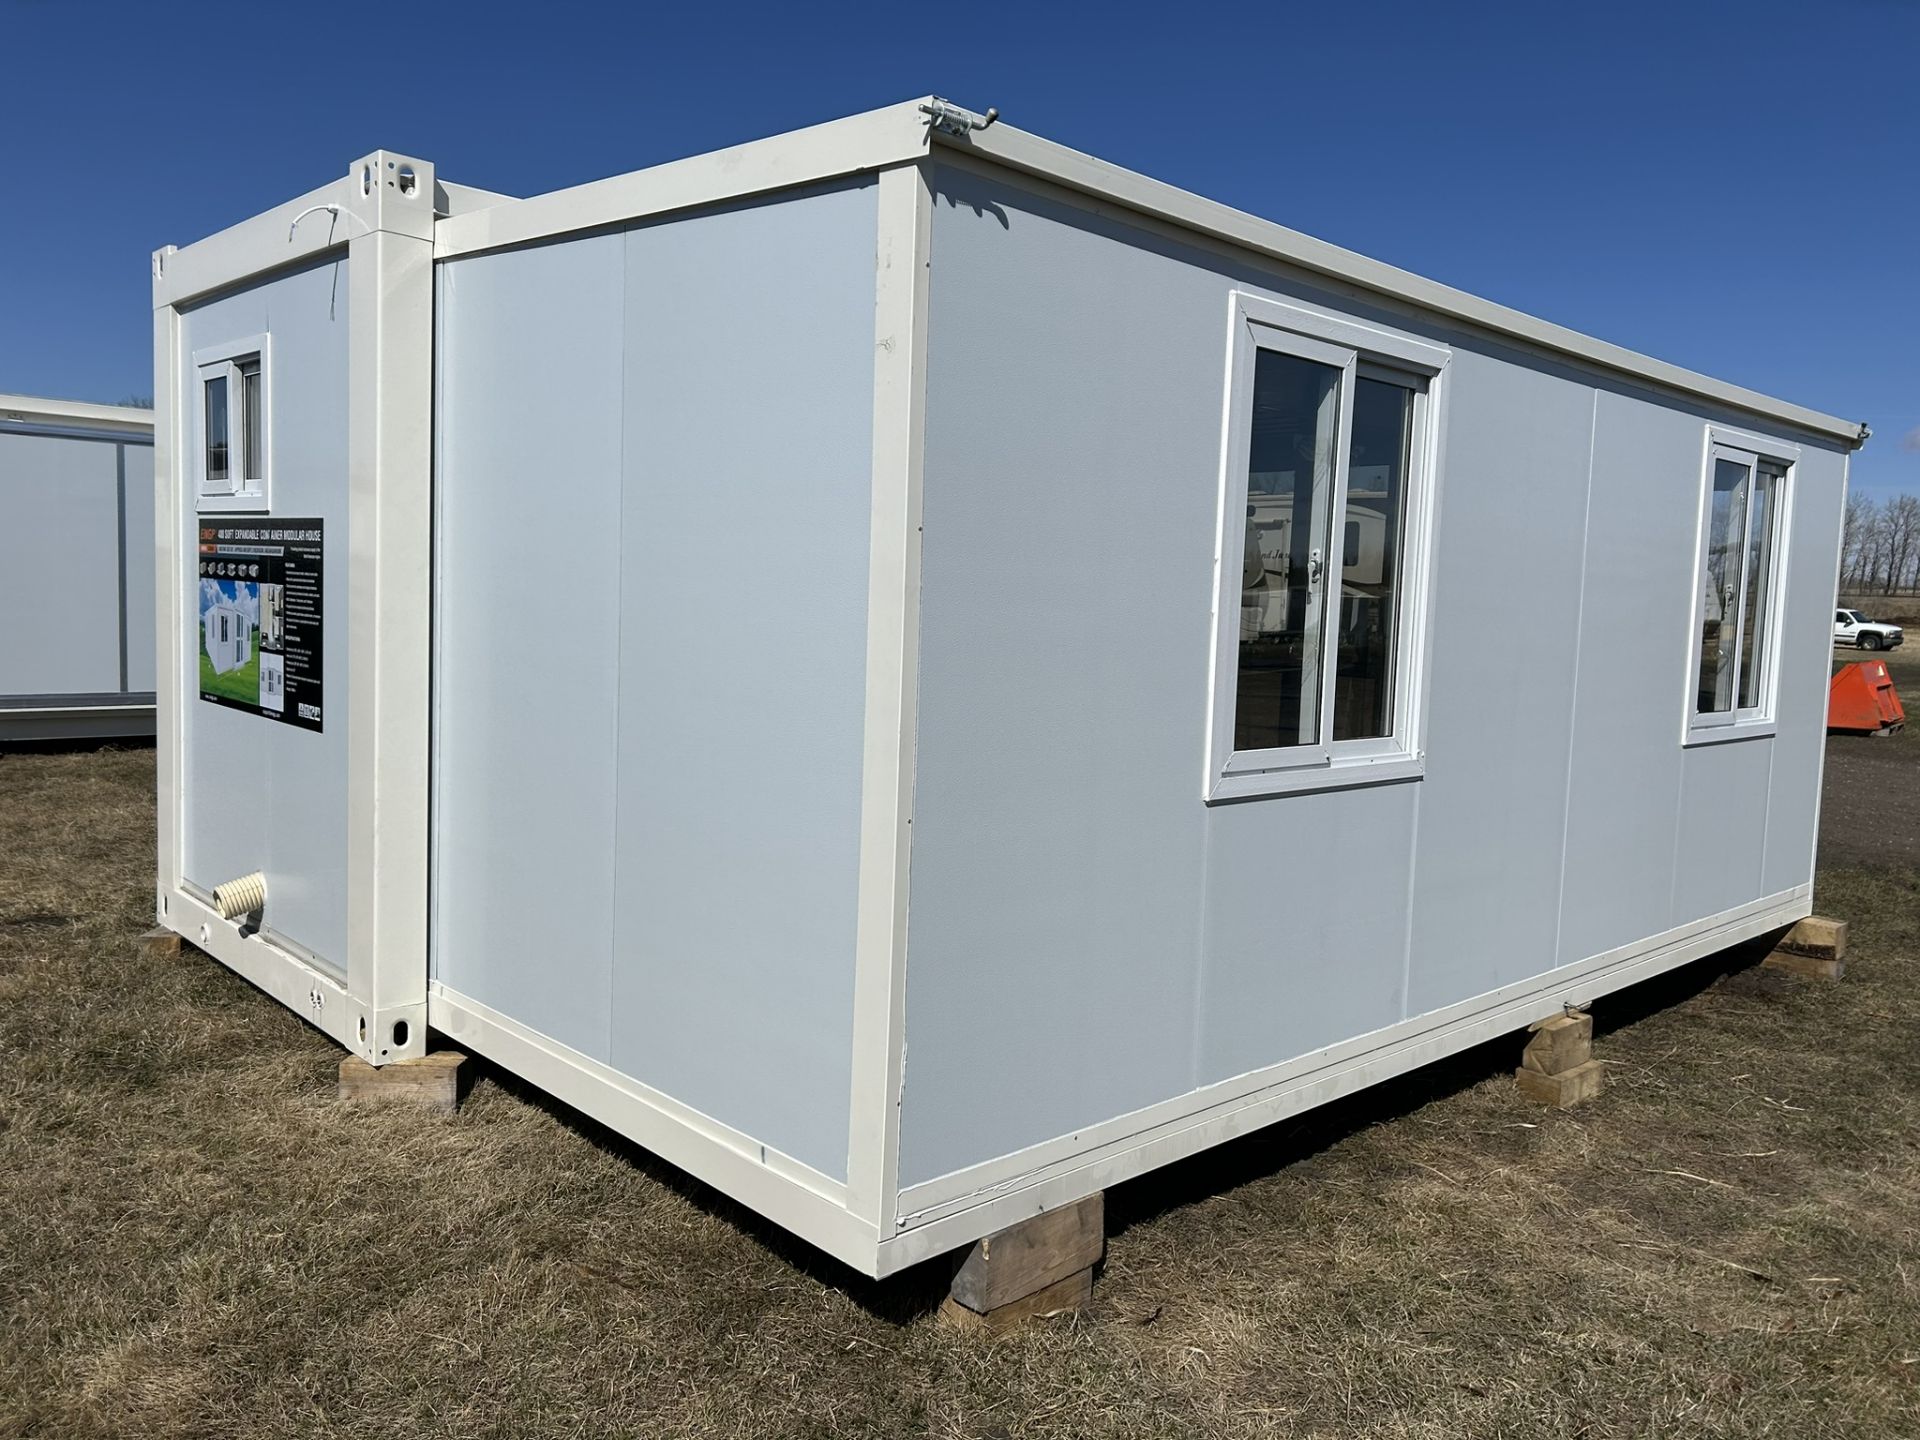 EINGP CG5800 400 SQFT EXPANDABLE CONTAINER MODULAR HOUSE, APPROX 400 SQFT. , 2-BEDROOM W/ WASHROOM - Image 3 of 12